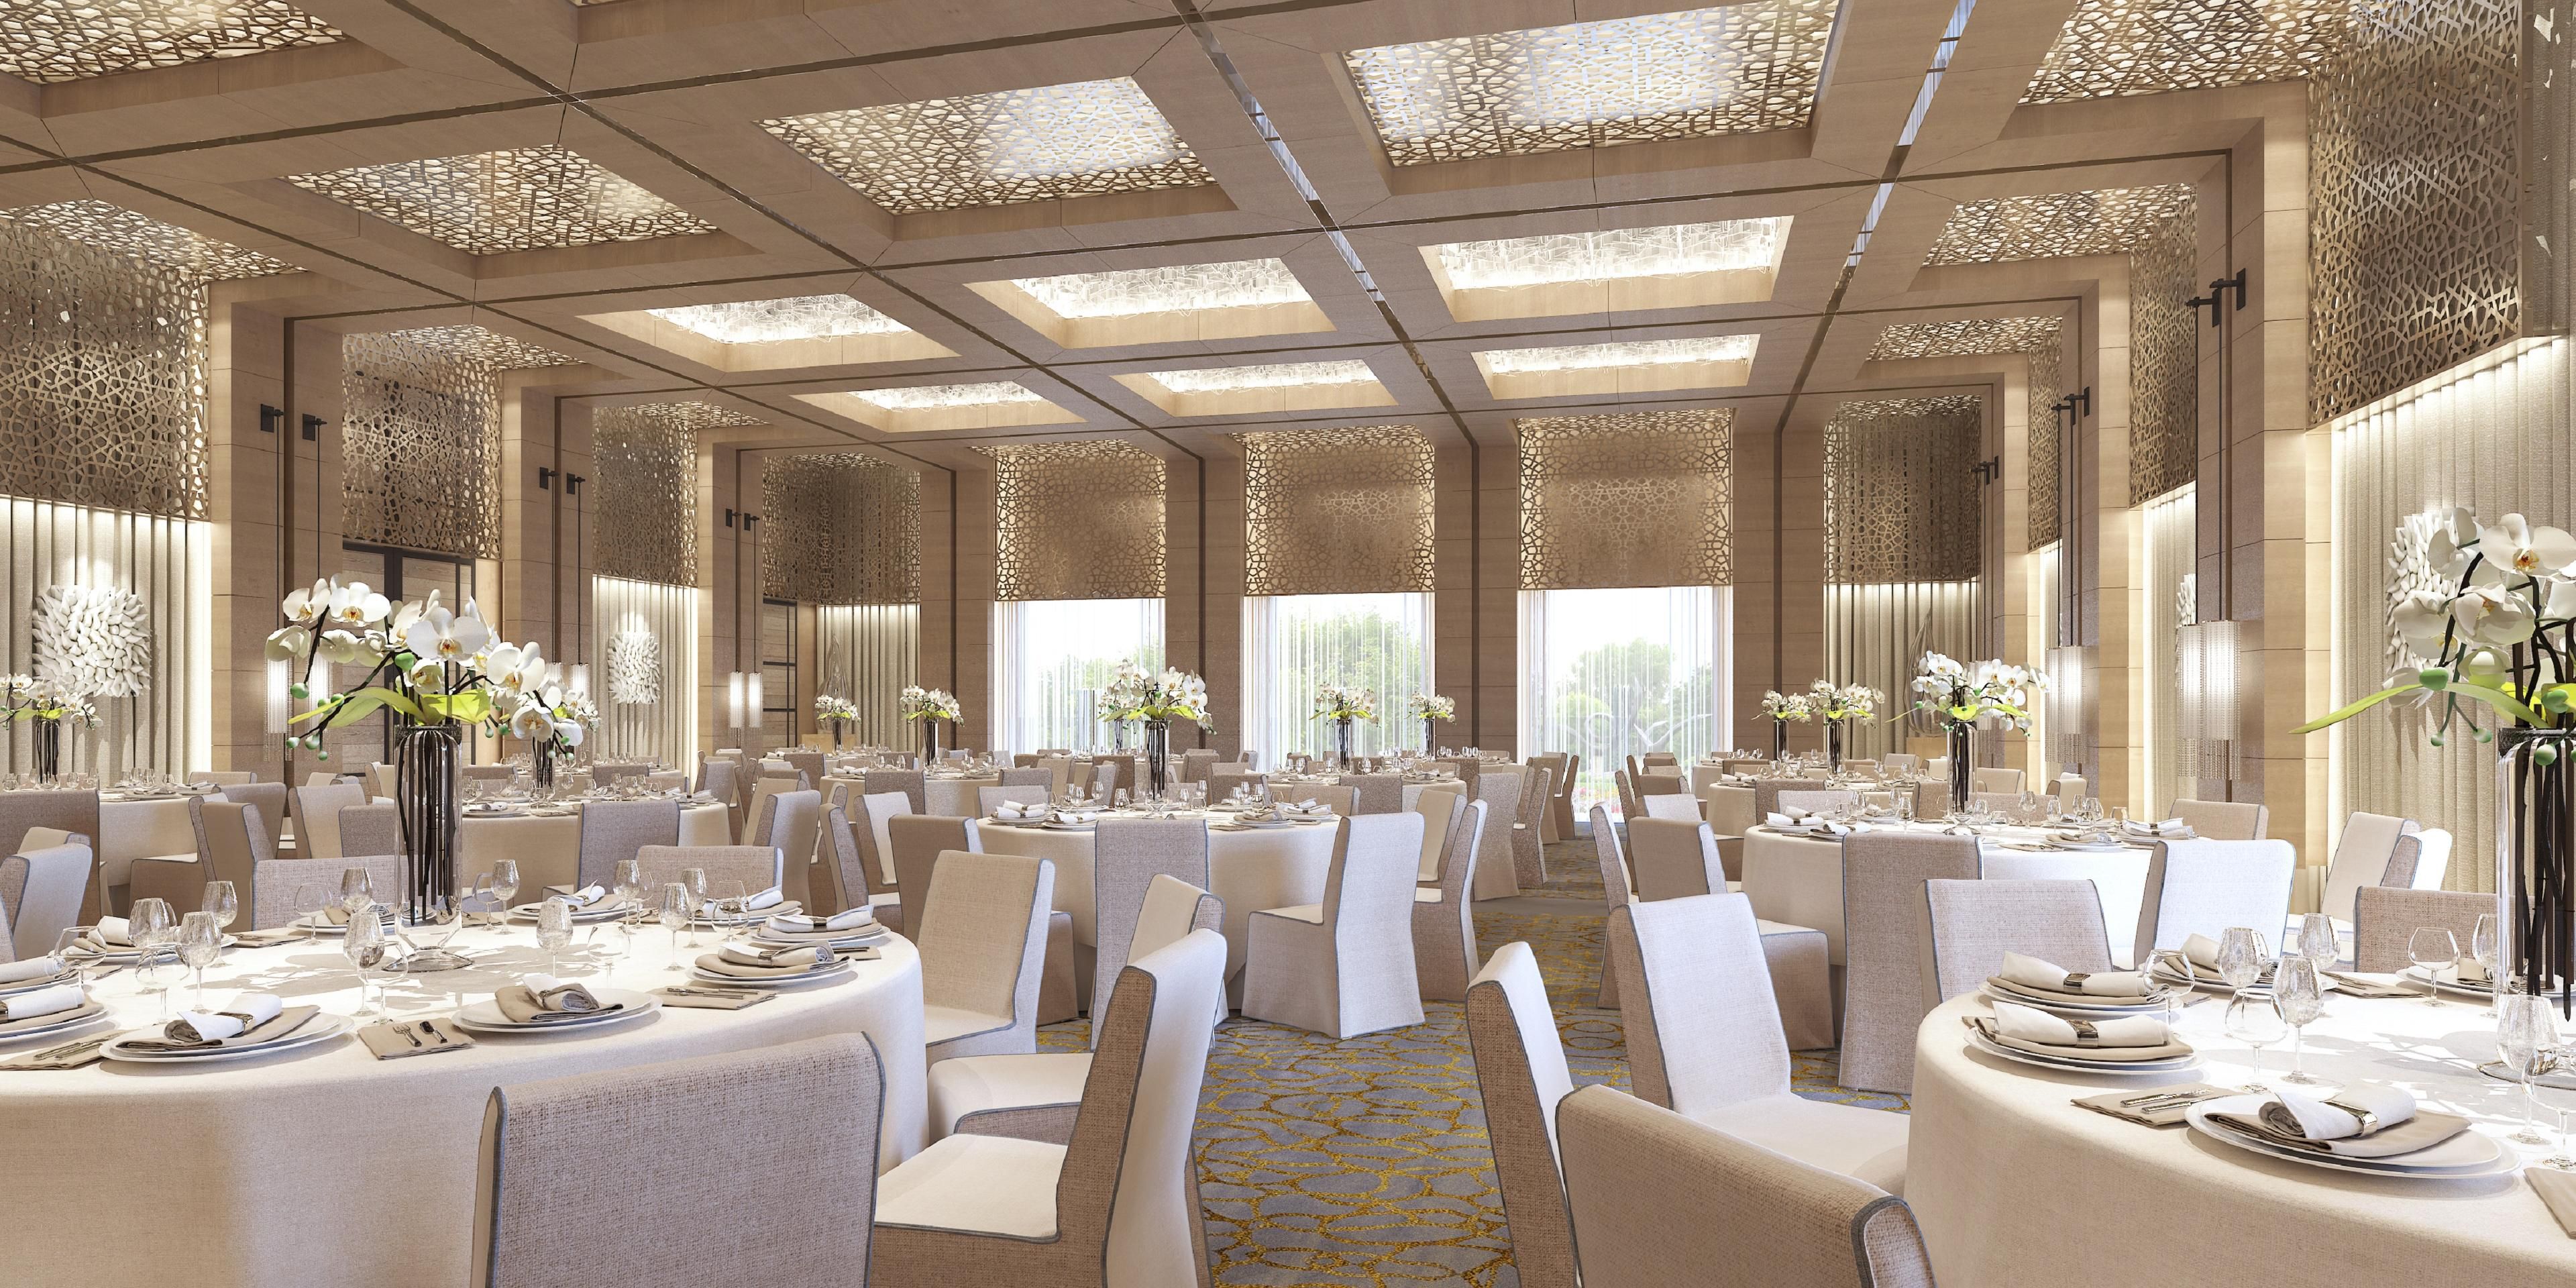 Filled with natural light and looking out over the glistening waters of the Arabian Gulf, our spaces are the perfect location for your next event. From intimate meetings to gala dinners and grand celebrations, our venues are designed to inspire, with a lavish ballroom, six flexible meeting rooms and two boardrooms.